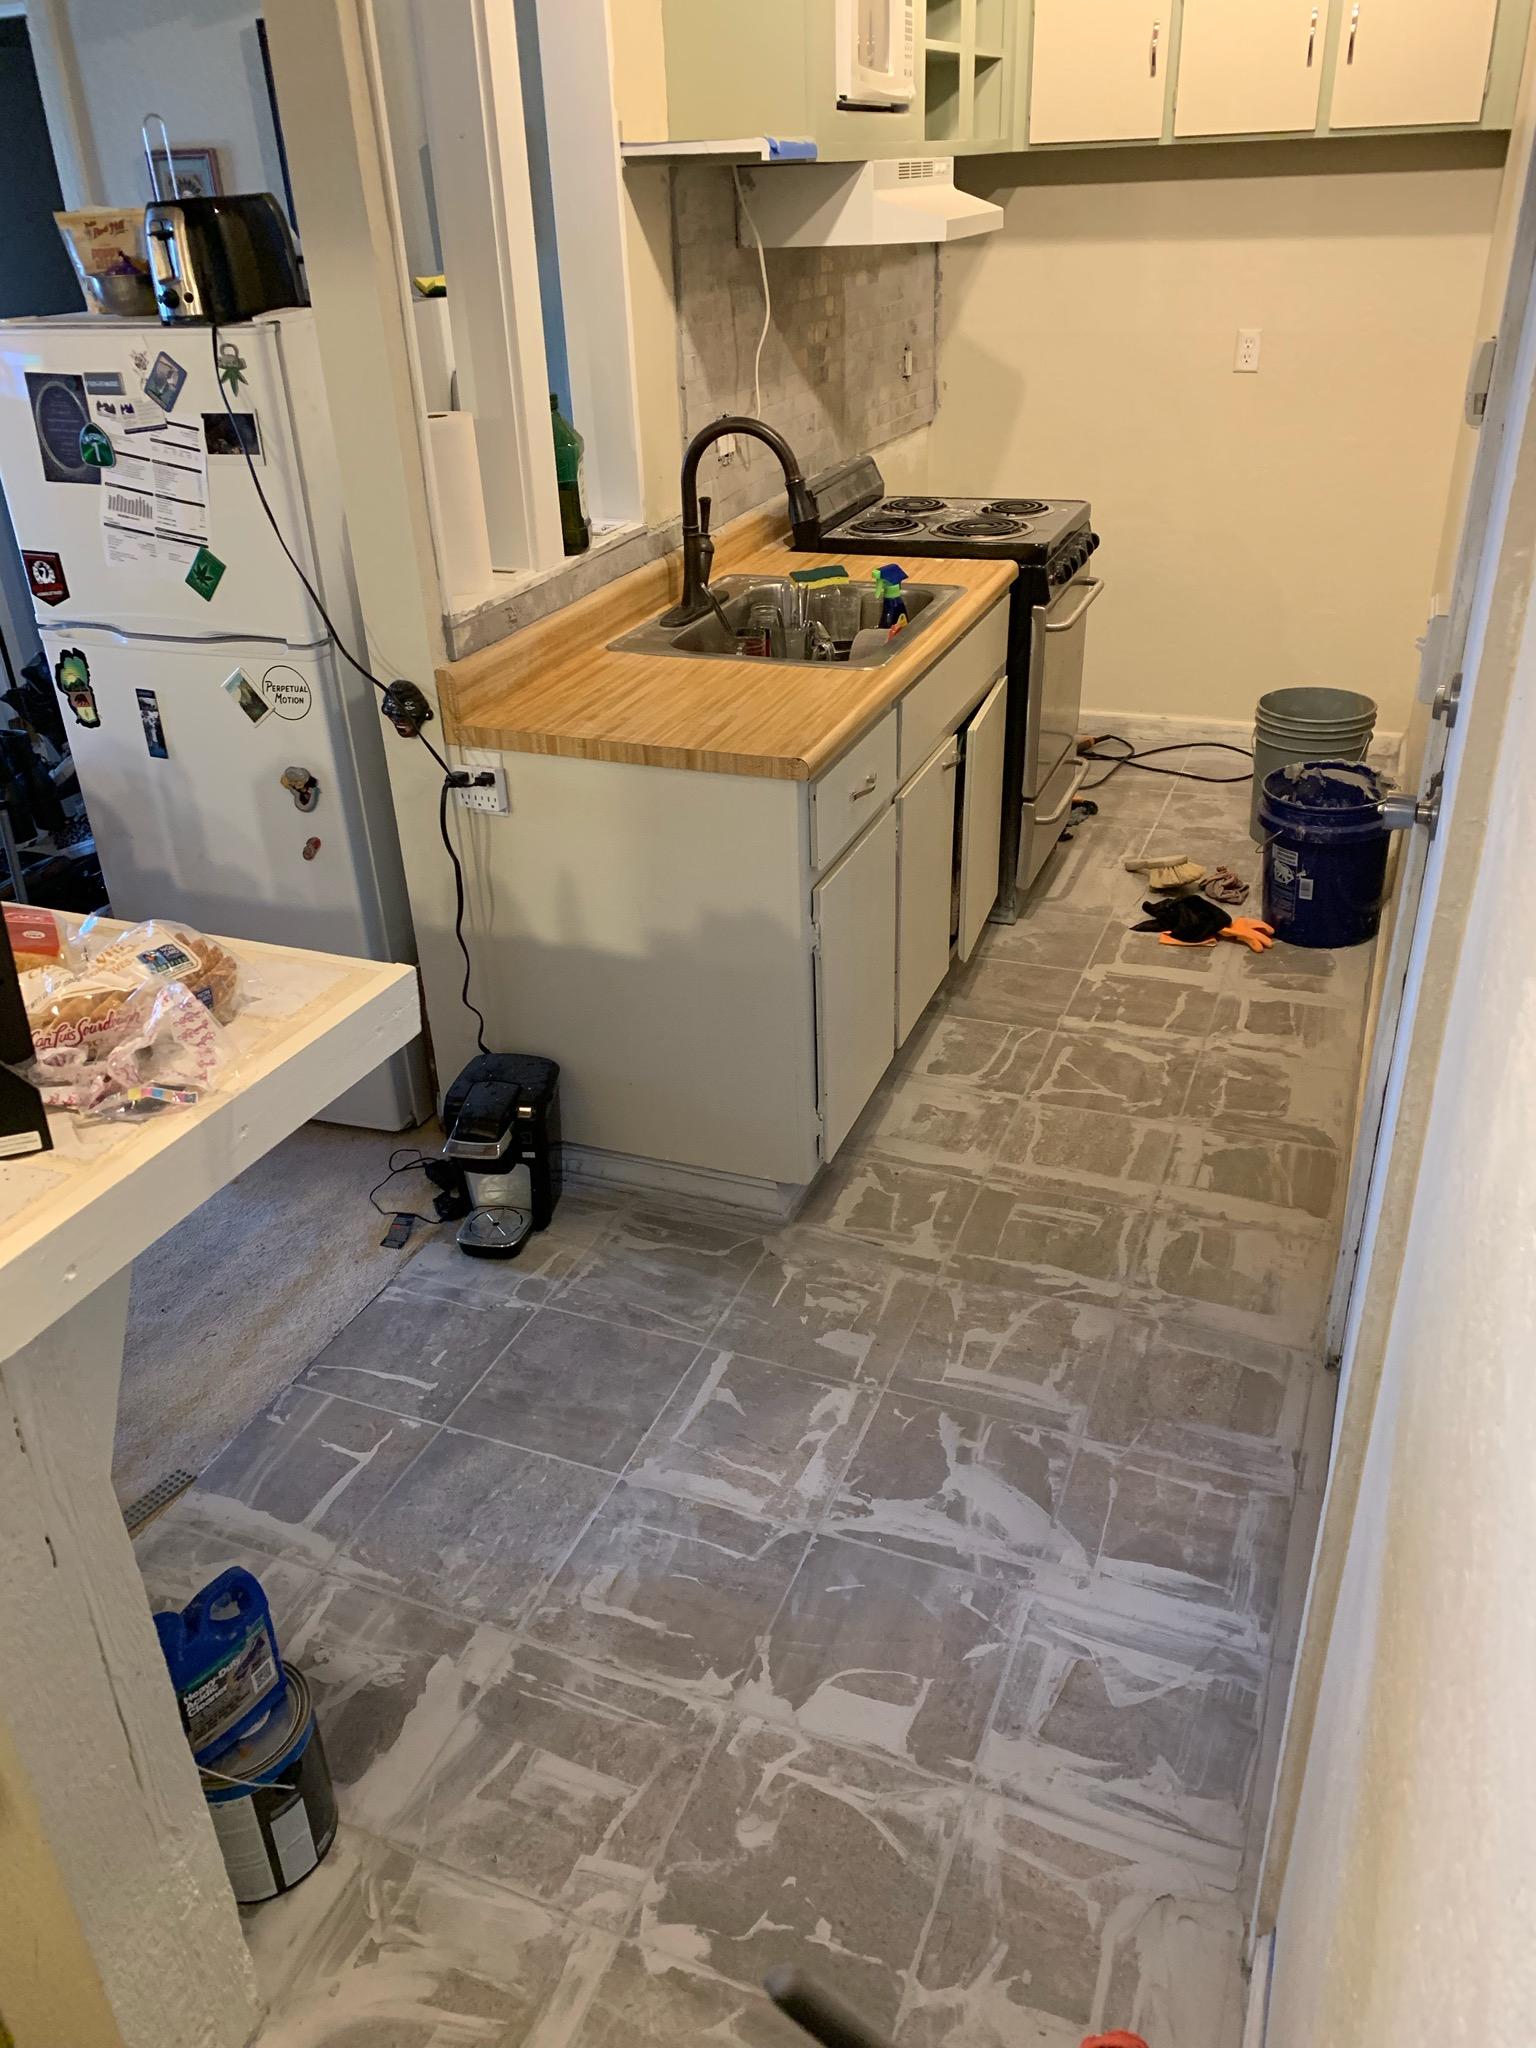 https://mikeysboard.com/threads/they-thought-they-could-clean-up-the-grout-the-next-day.292361/